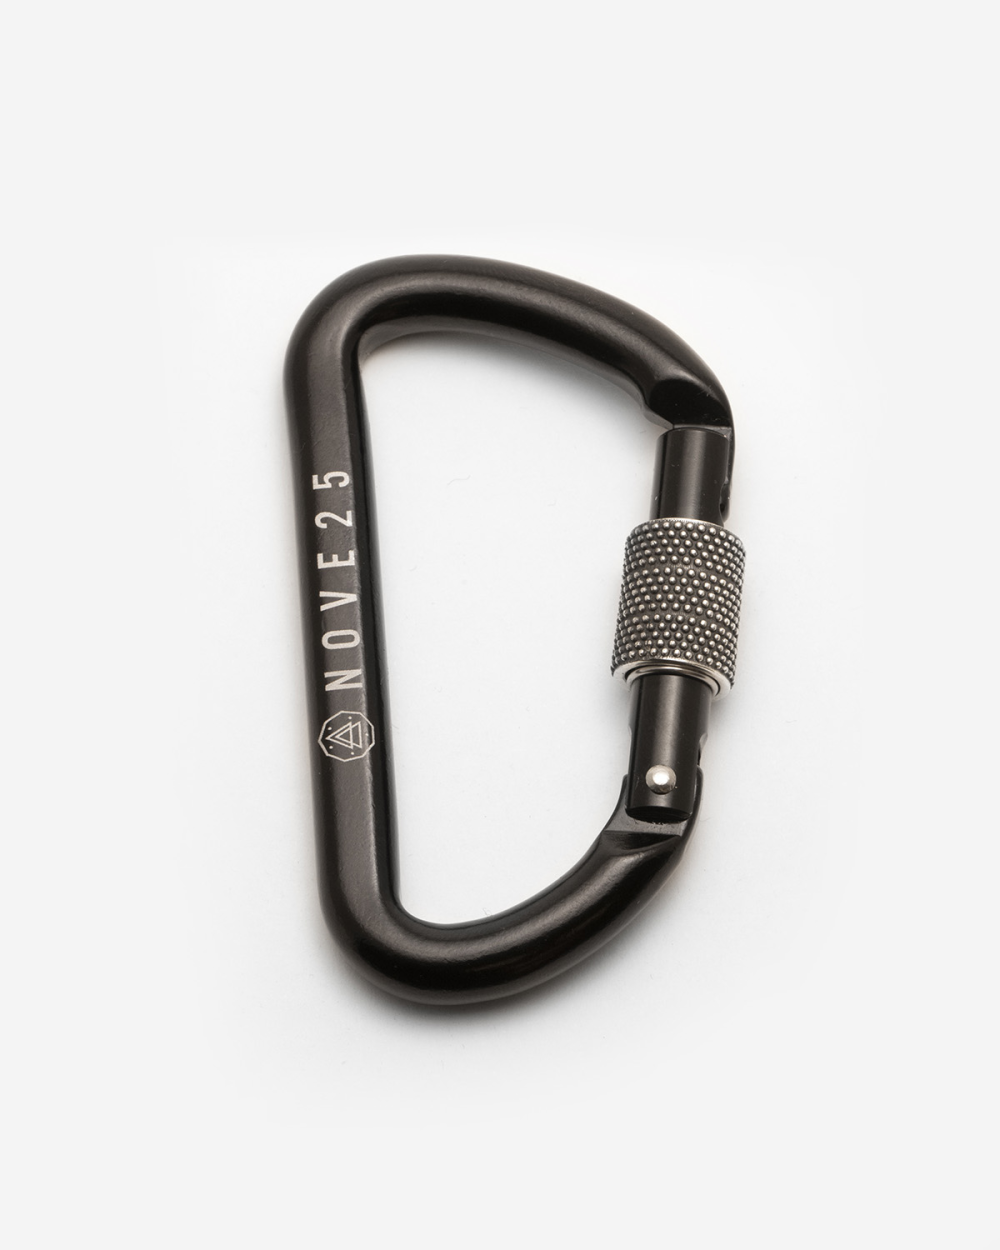 DOTTED KEY CHAIN CARABINER